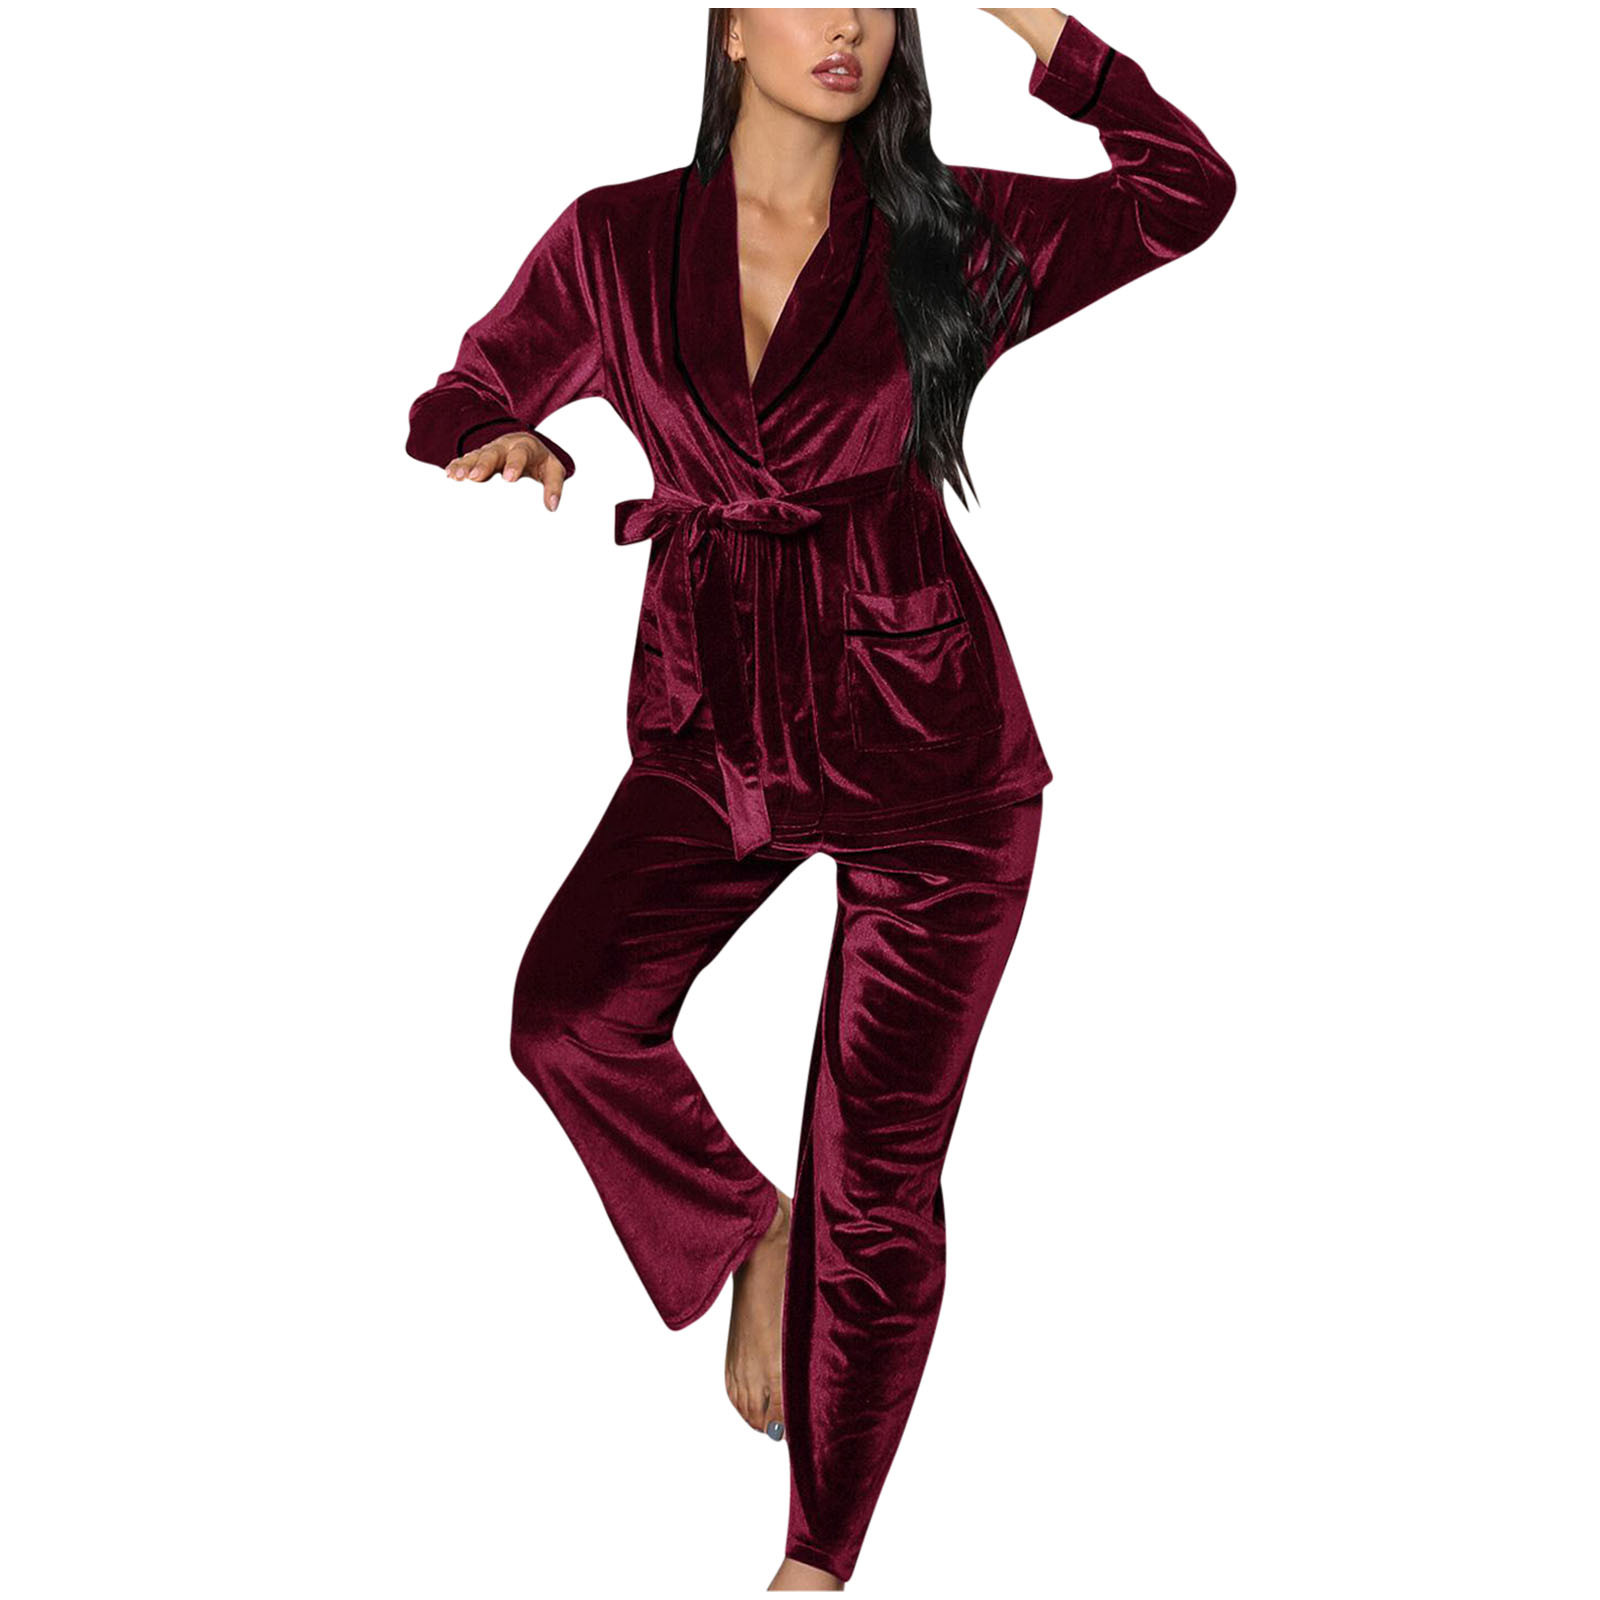 Velour Pjs for Women Sets,Ladies Velvet Pyjama Set Two Pieces Long Sleeve Casual V Neck Wrap Sweatshirt and Lounge Bottoms Nightwear Loungwear Autumn Winter Pajama Sets Sale Clearance - image 1 of 5